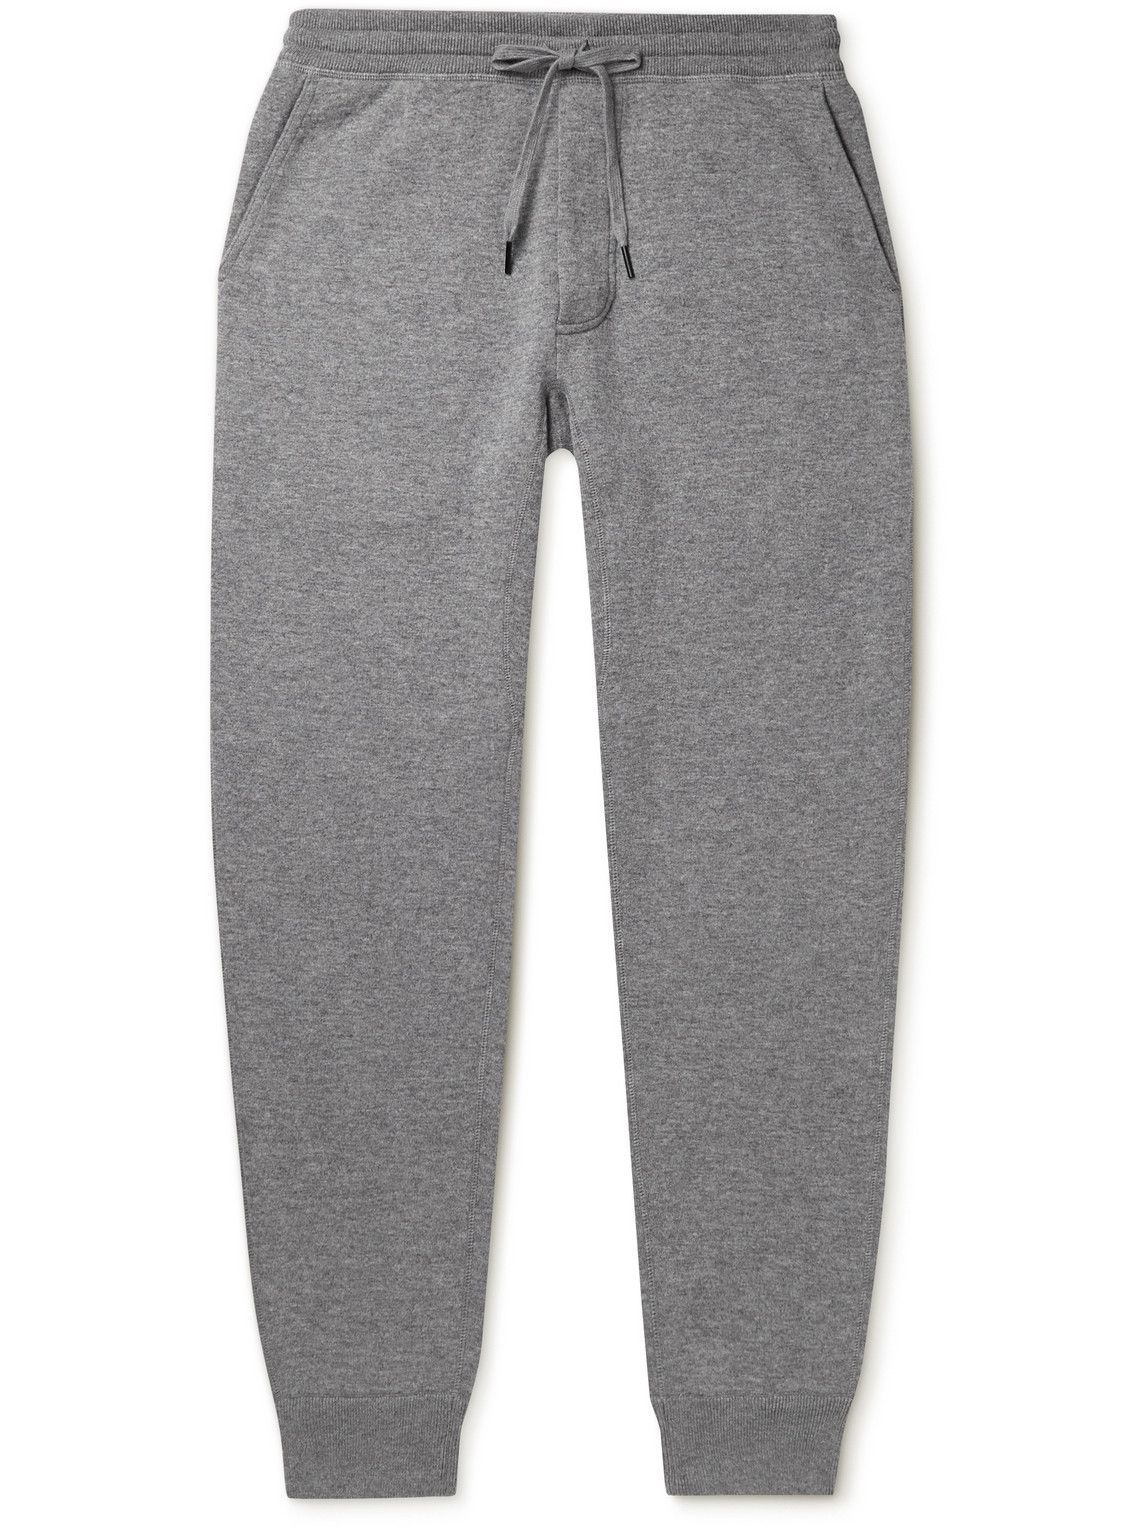 TOM FORD - Tapered Cashmere-Blend Sweatpants - Gray TOM FORD